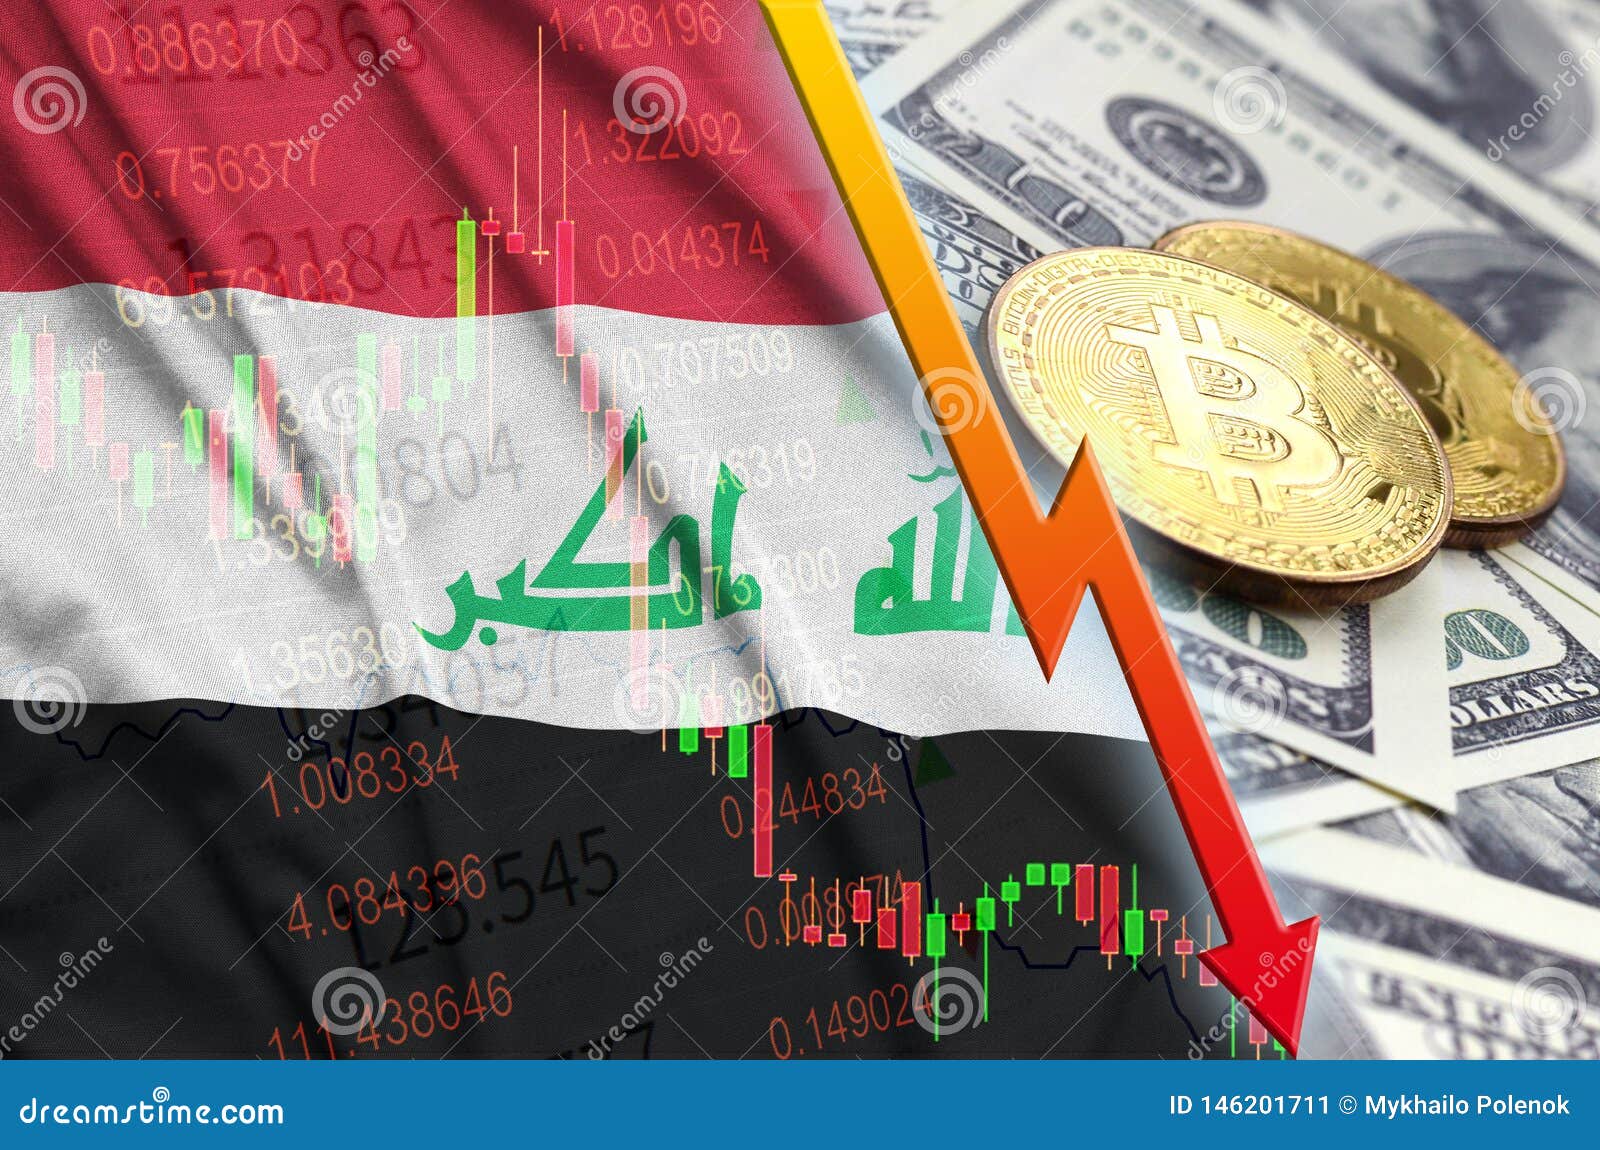 crypto currency investing iraqi